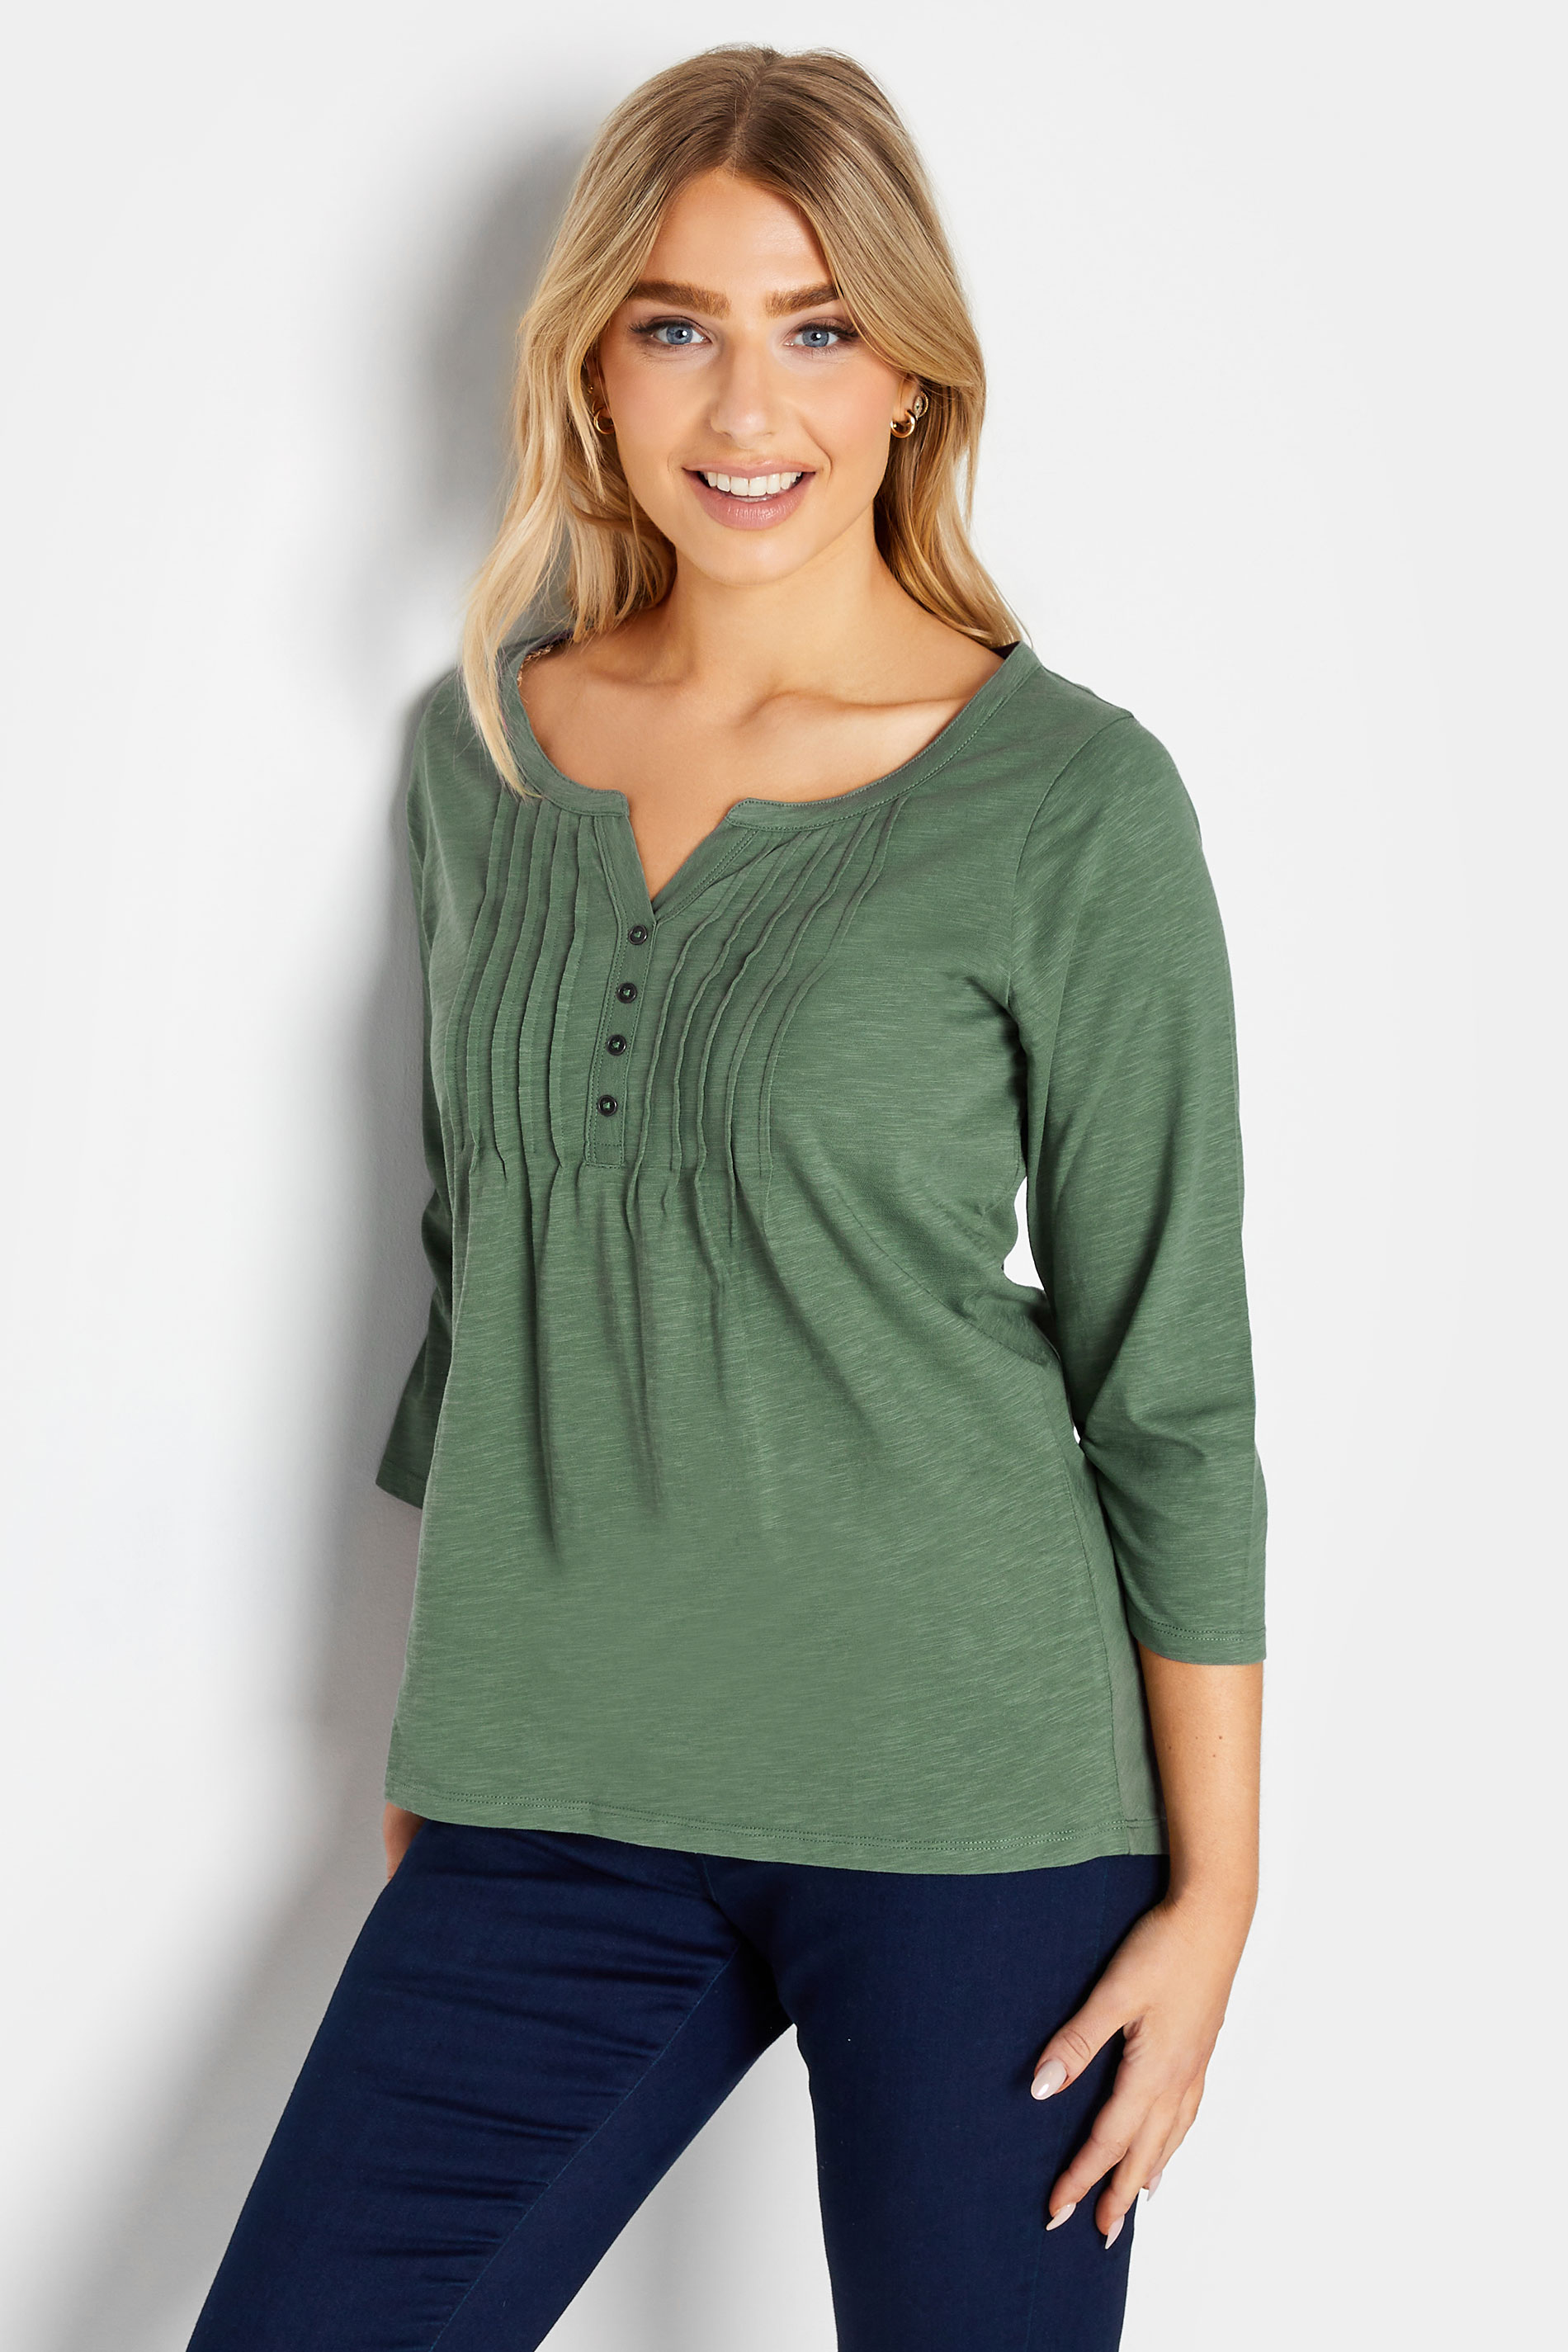 M&Co Sage Green Cotton Henley Top | M&Co 1